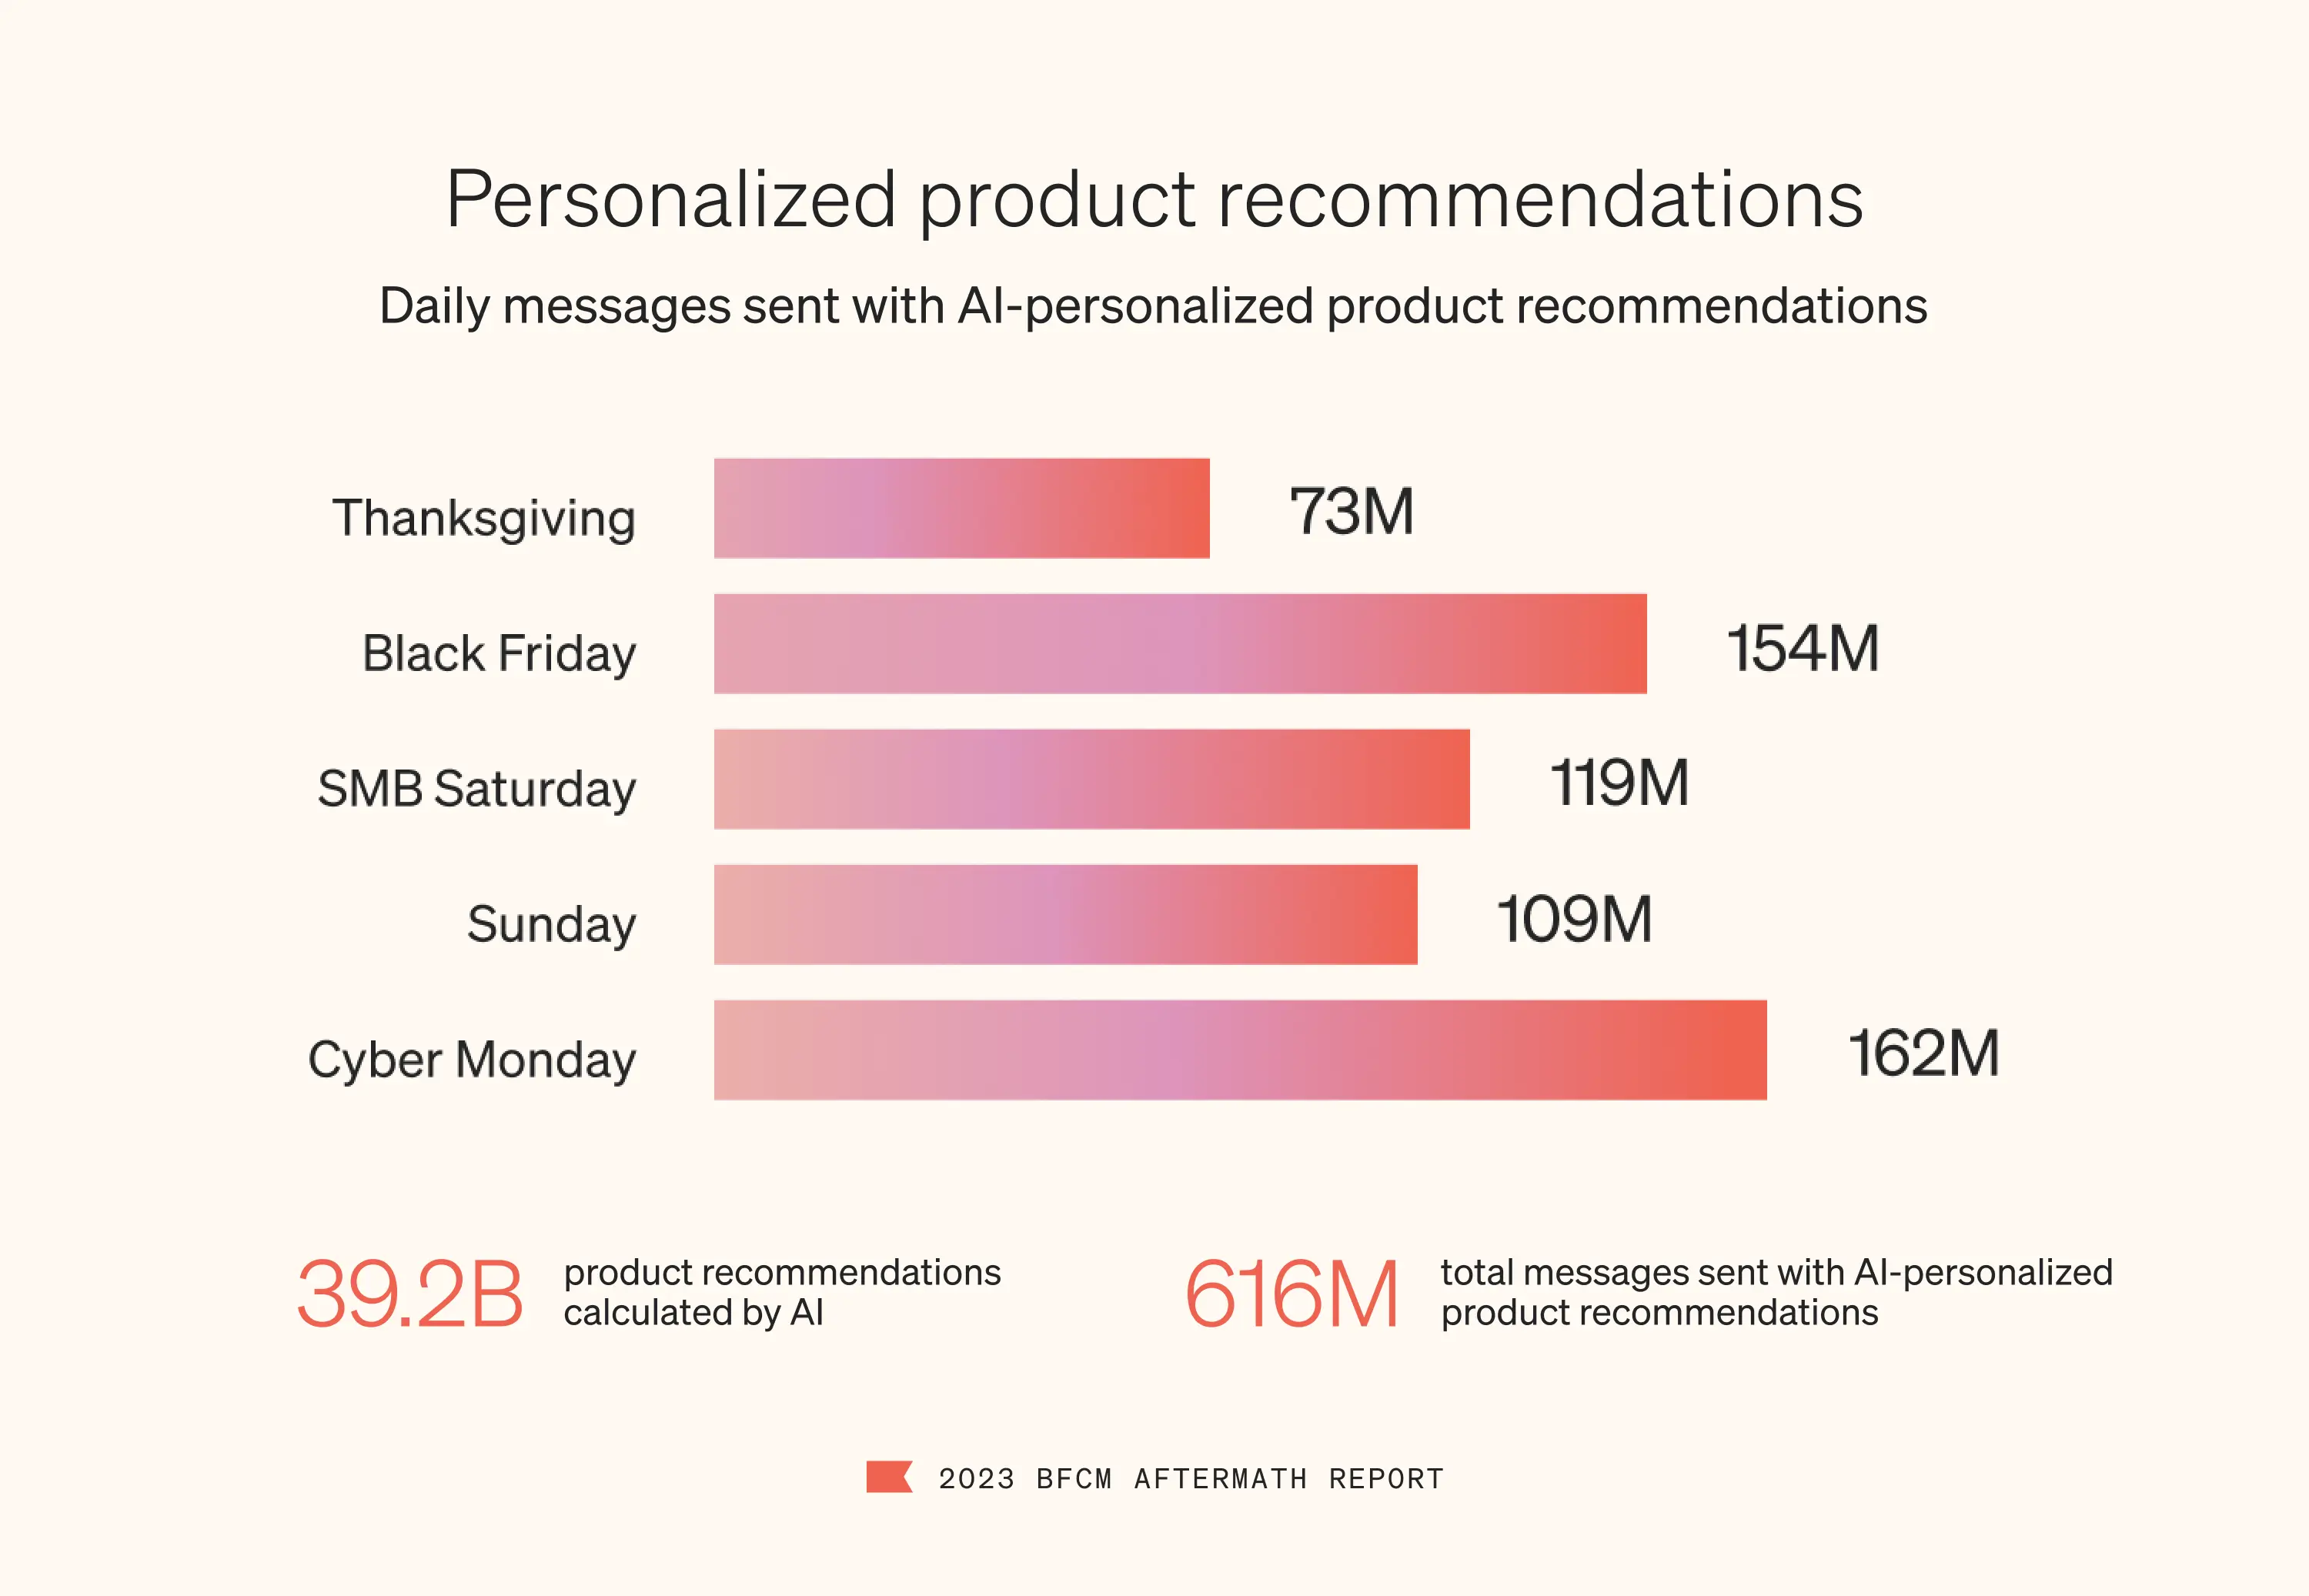 In a color scheme of poppy bars and black font on a cotton background, image visualizes AI personalization data from BFCM for Klaviyo customers. Klaviyo’s AI calculated 39.2B product recommendations over the time period, and brands using Klaviyo sent 616M total messages with AI-personalized product recommendations. Black Friday saw the most AI-personalized recommendations at 154M.